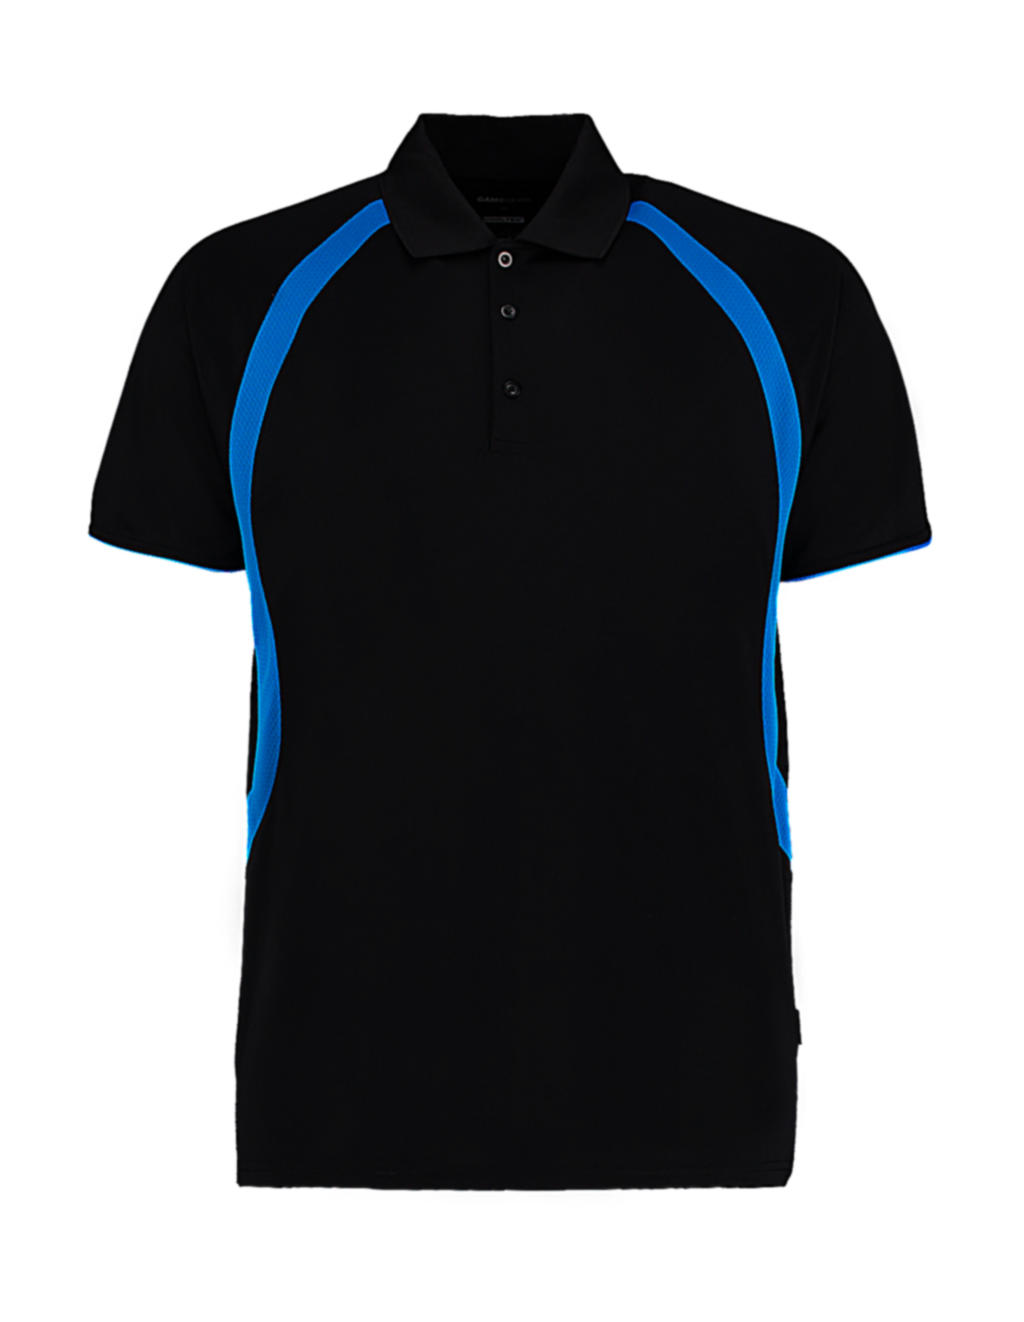  Classic Fit Cooltex? Riviera Polo Shirt in Farbe Black/Electric Blue